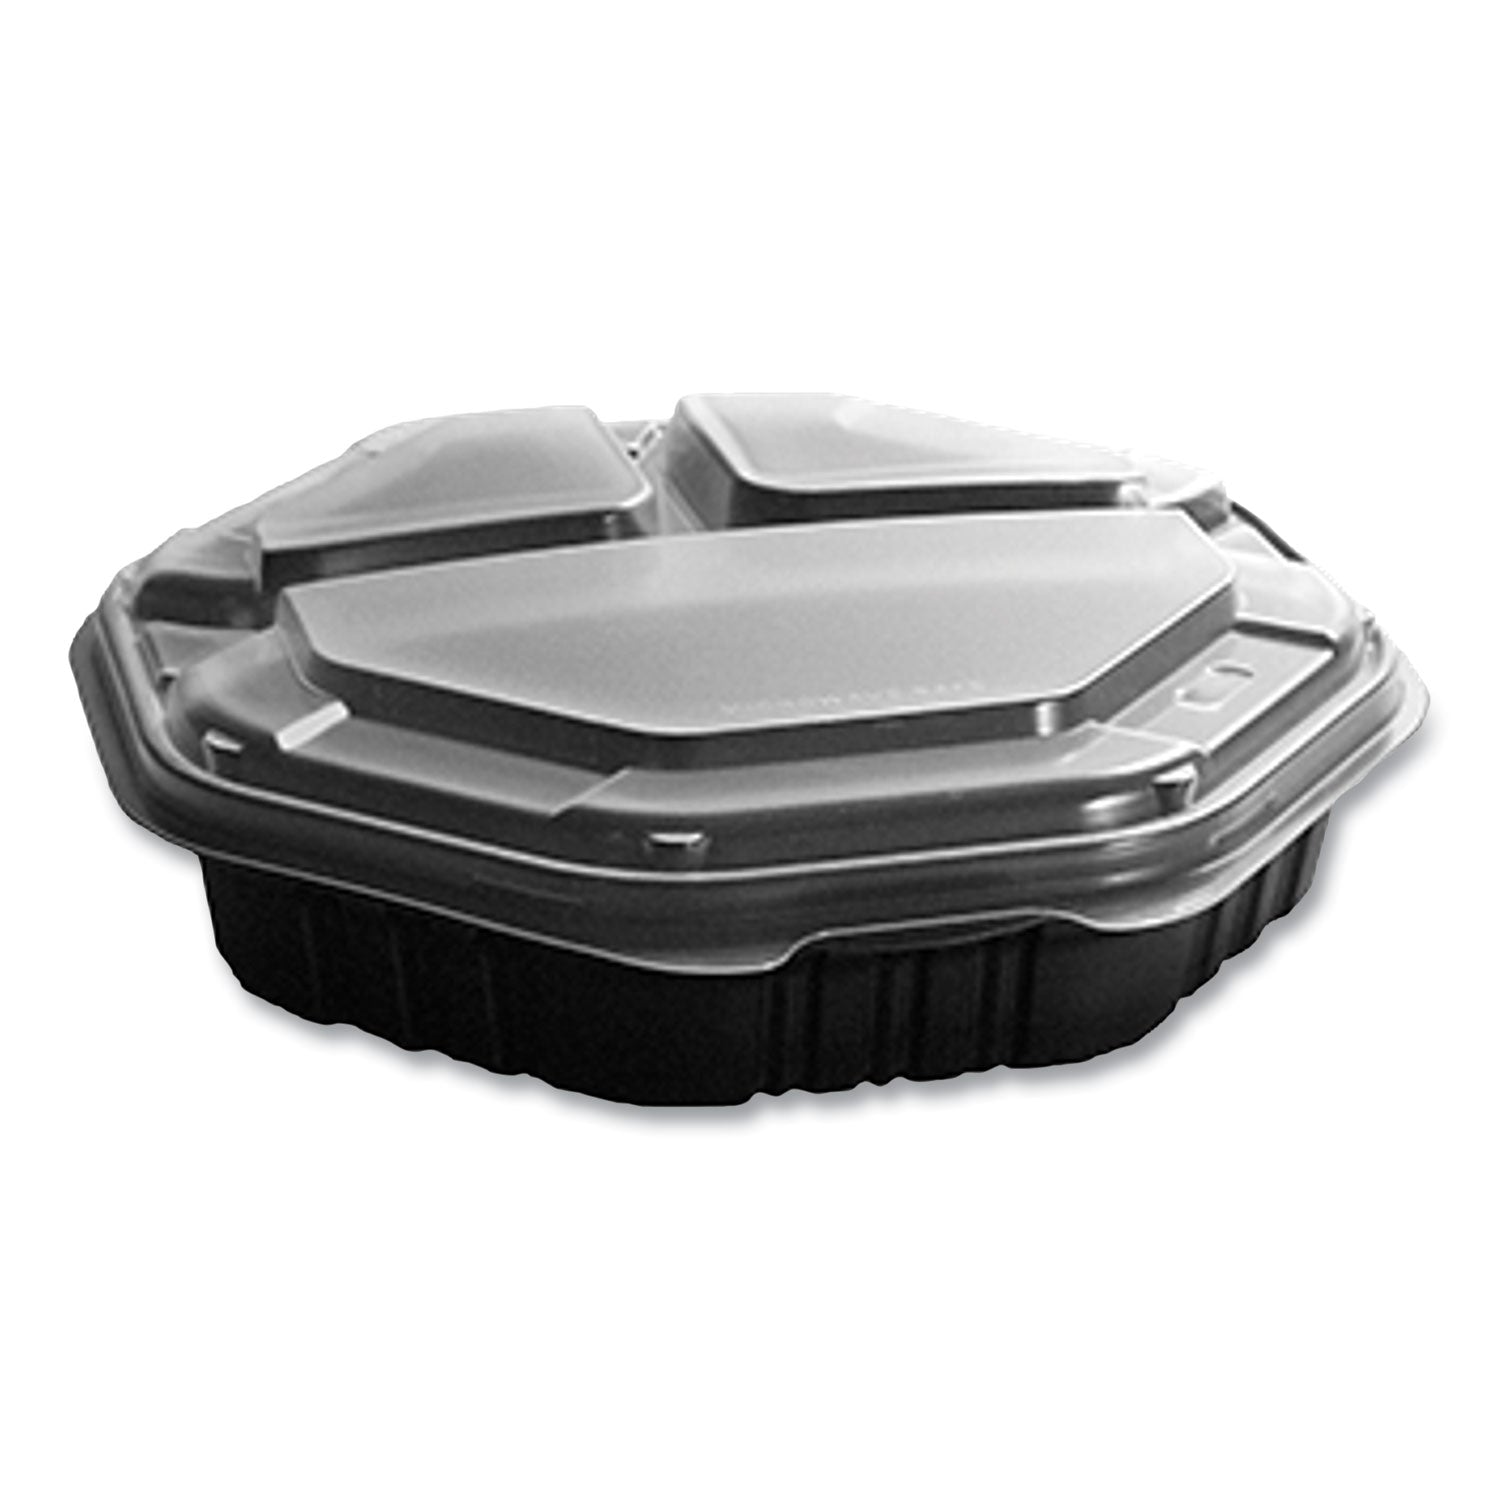 octaview-hinged-lid-hot-food-containers-3-compartment-38-oz-955-x-91-x-24-black-clear-plastic-100-carton_scc809014pp94 - 7